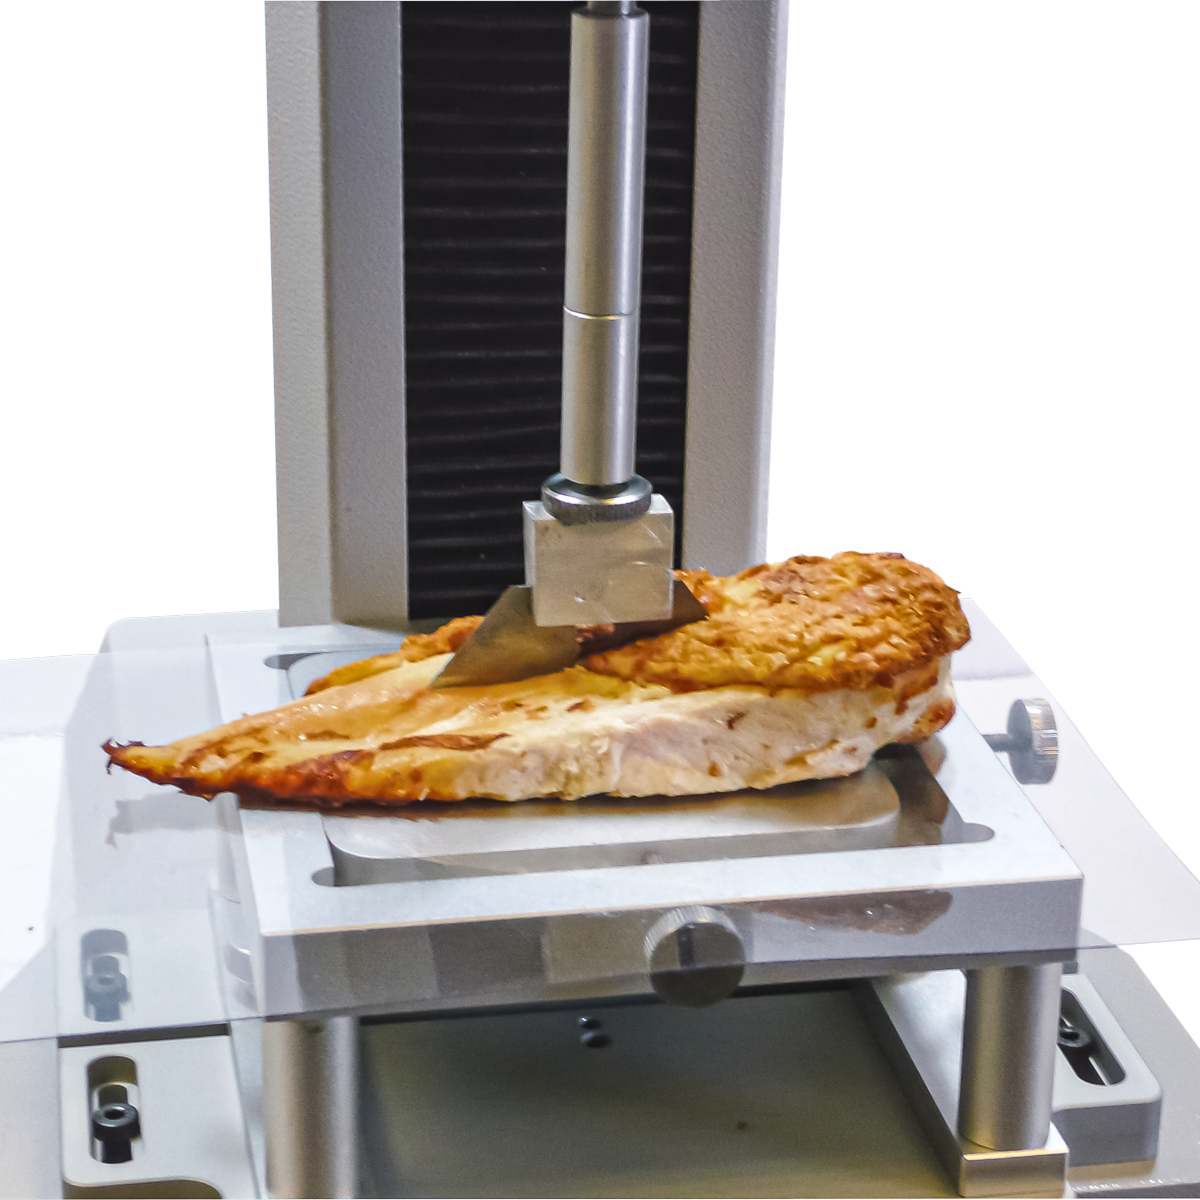 Testing the muscle texture of chicken breast